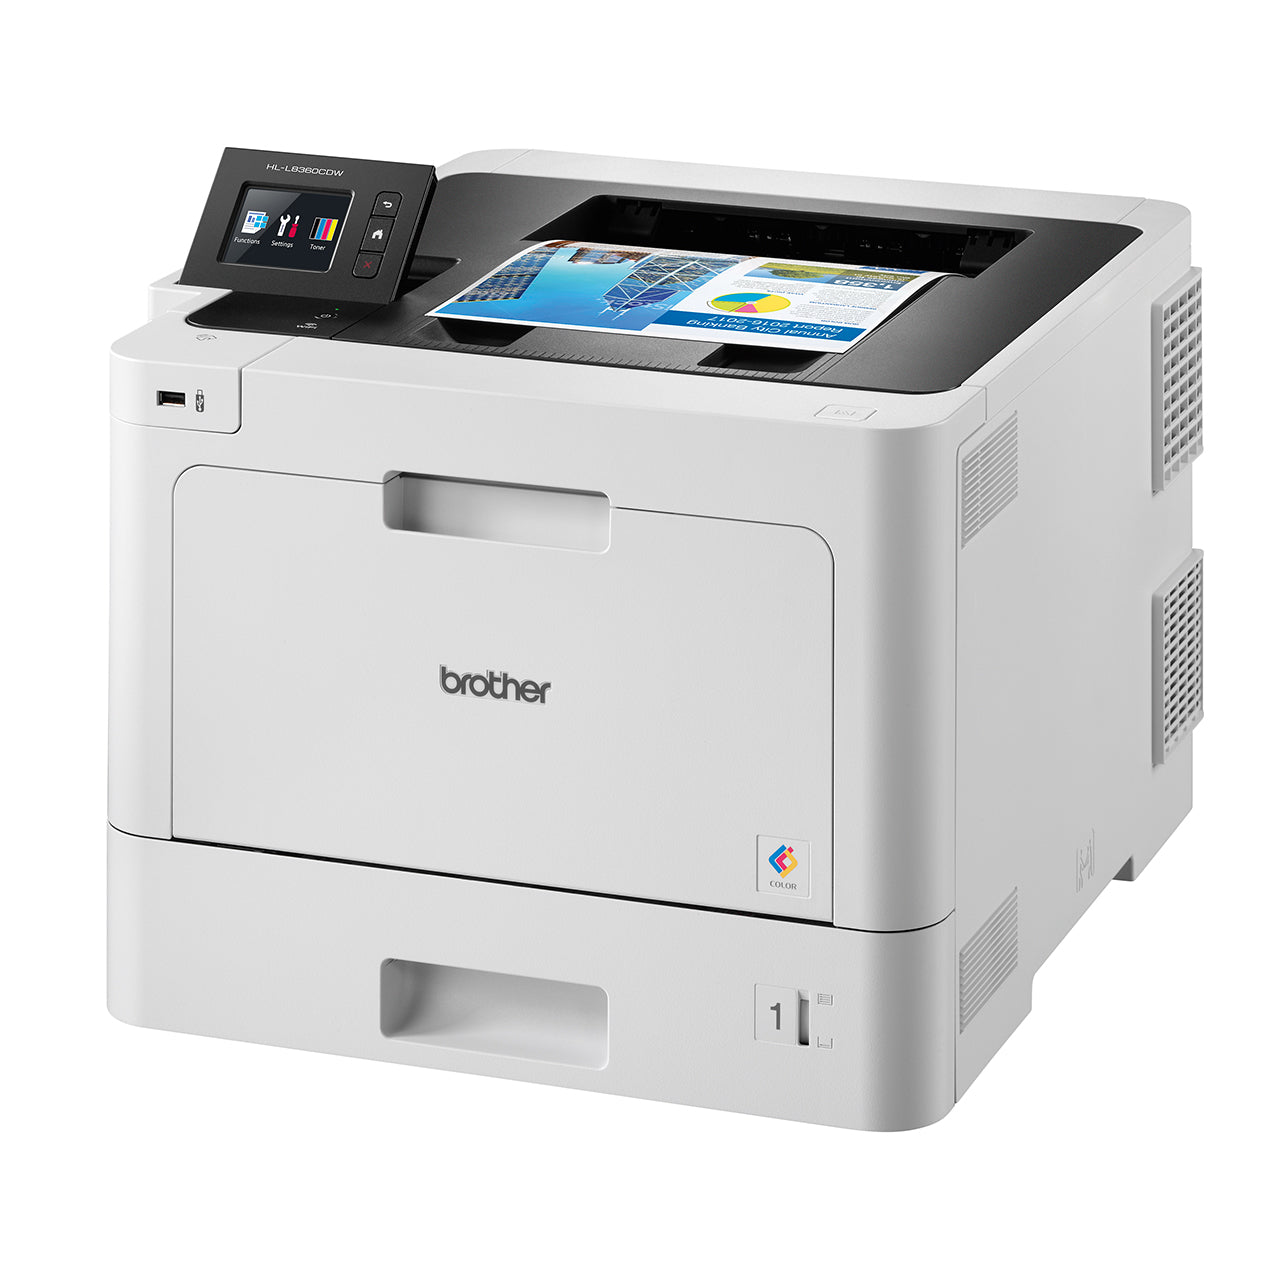 Brother HL-L8360CDW Color Laser + Duplex and Wireless Printer